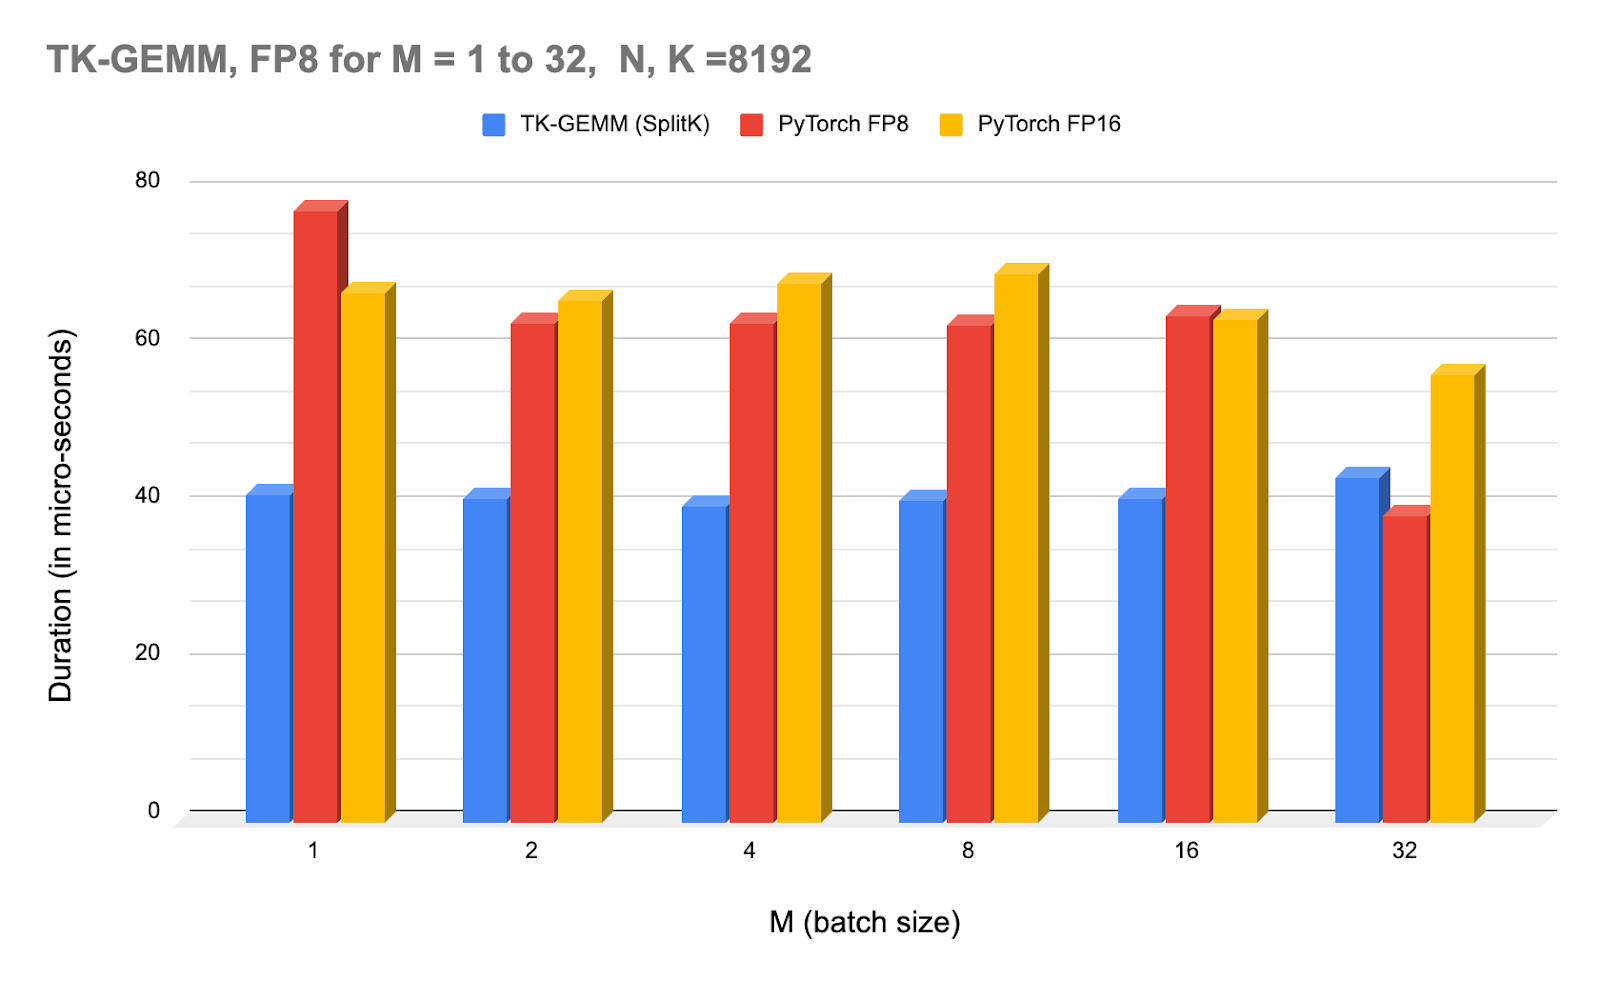 NCU profiler times for TK-GEMM under varying batch sizes, and compared with PyTorch (calling cuBLAS) FP8 and FP16.